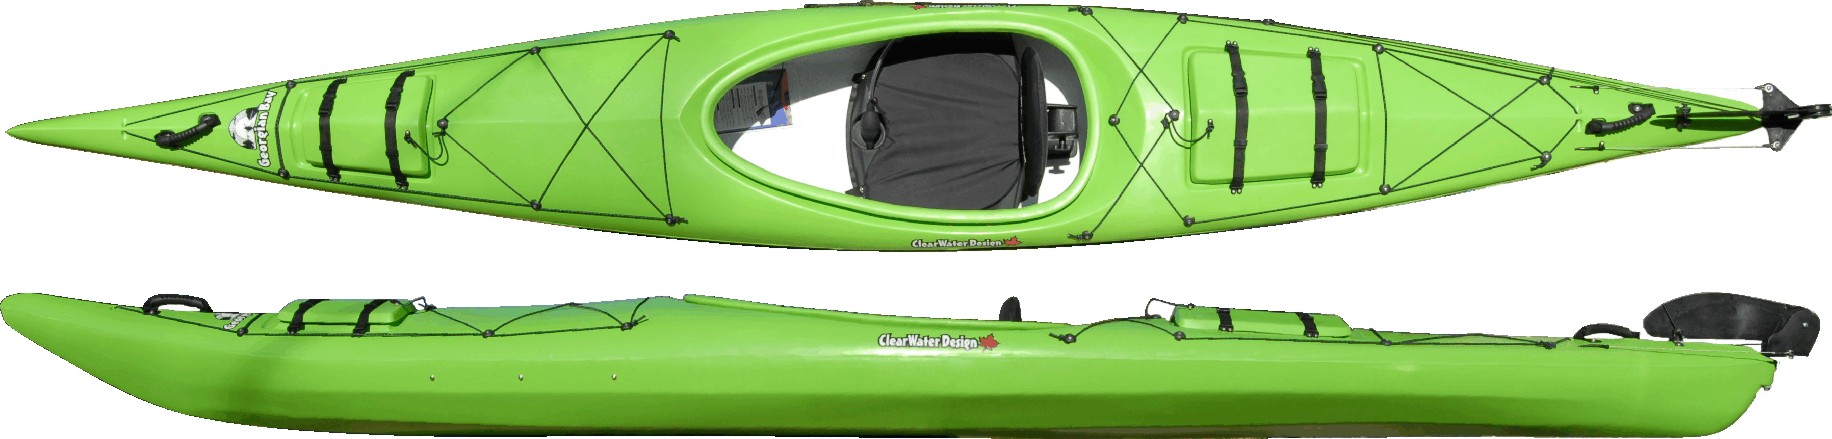 http://www.clearwaterdesignboats.com/images/gbay1.jpg